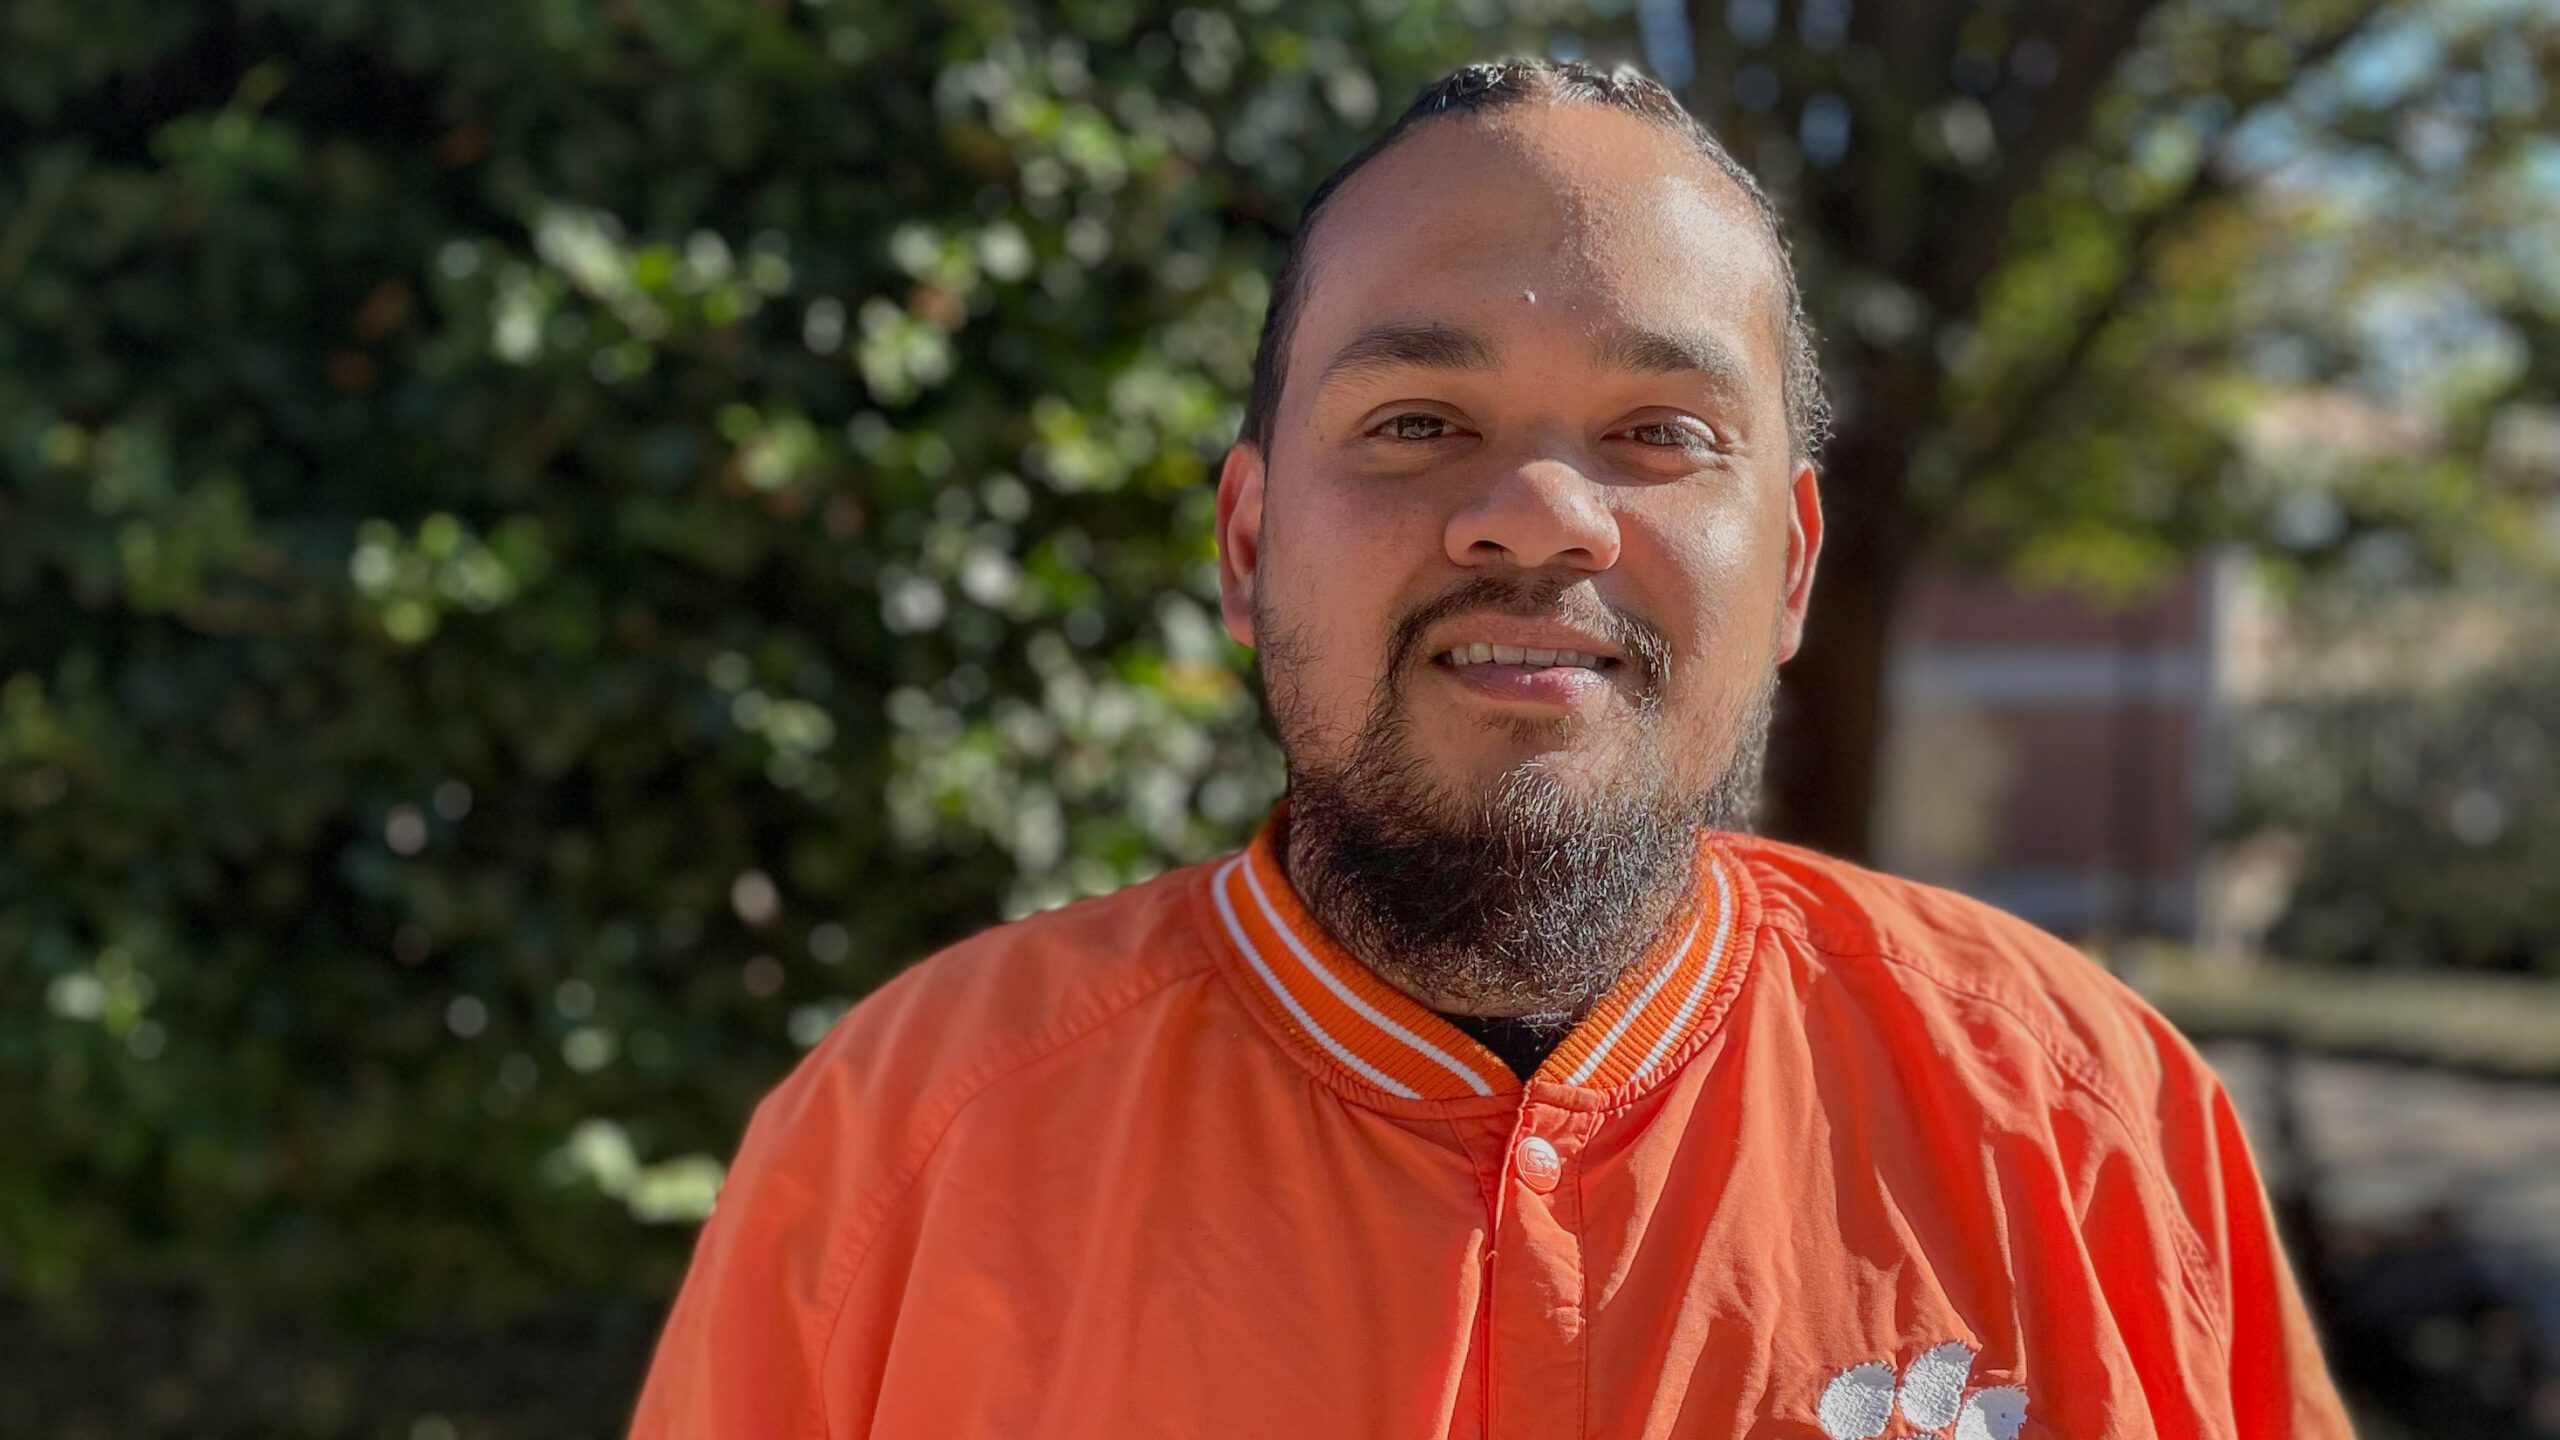 Melvin Villaver is pictured in an orange Clemson Tigers Starter Jacket near the Carillon Garden on a sunny fall afternoon.